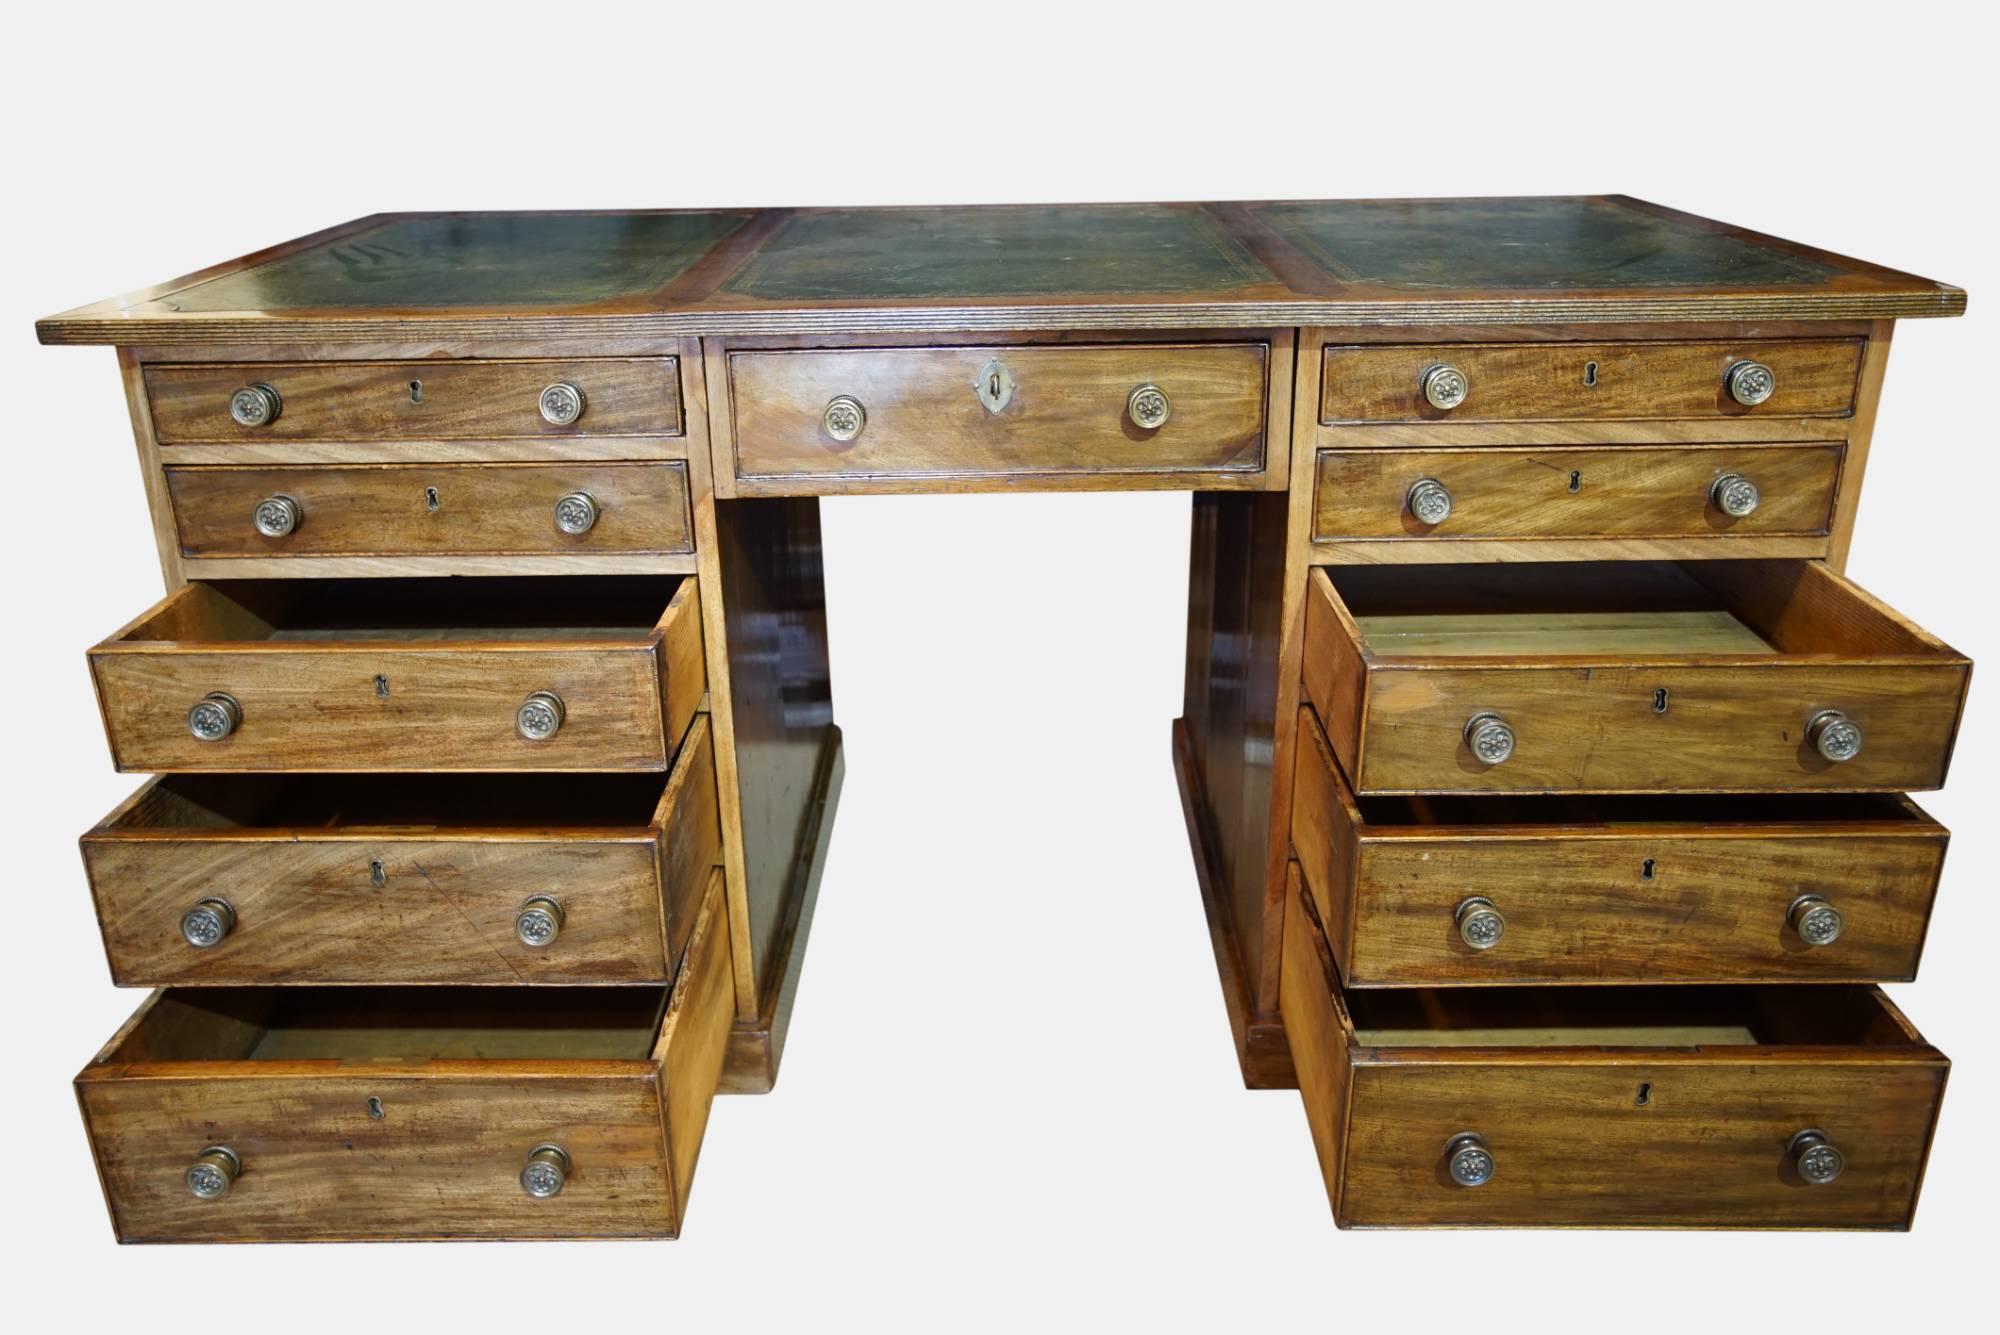 A mahogany pedestal desk with dummy drawers to rear,

circa 1850.